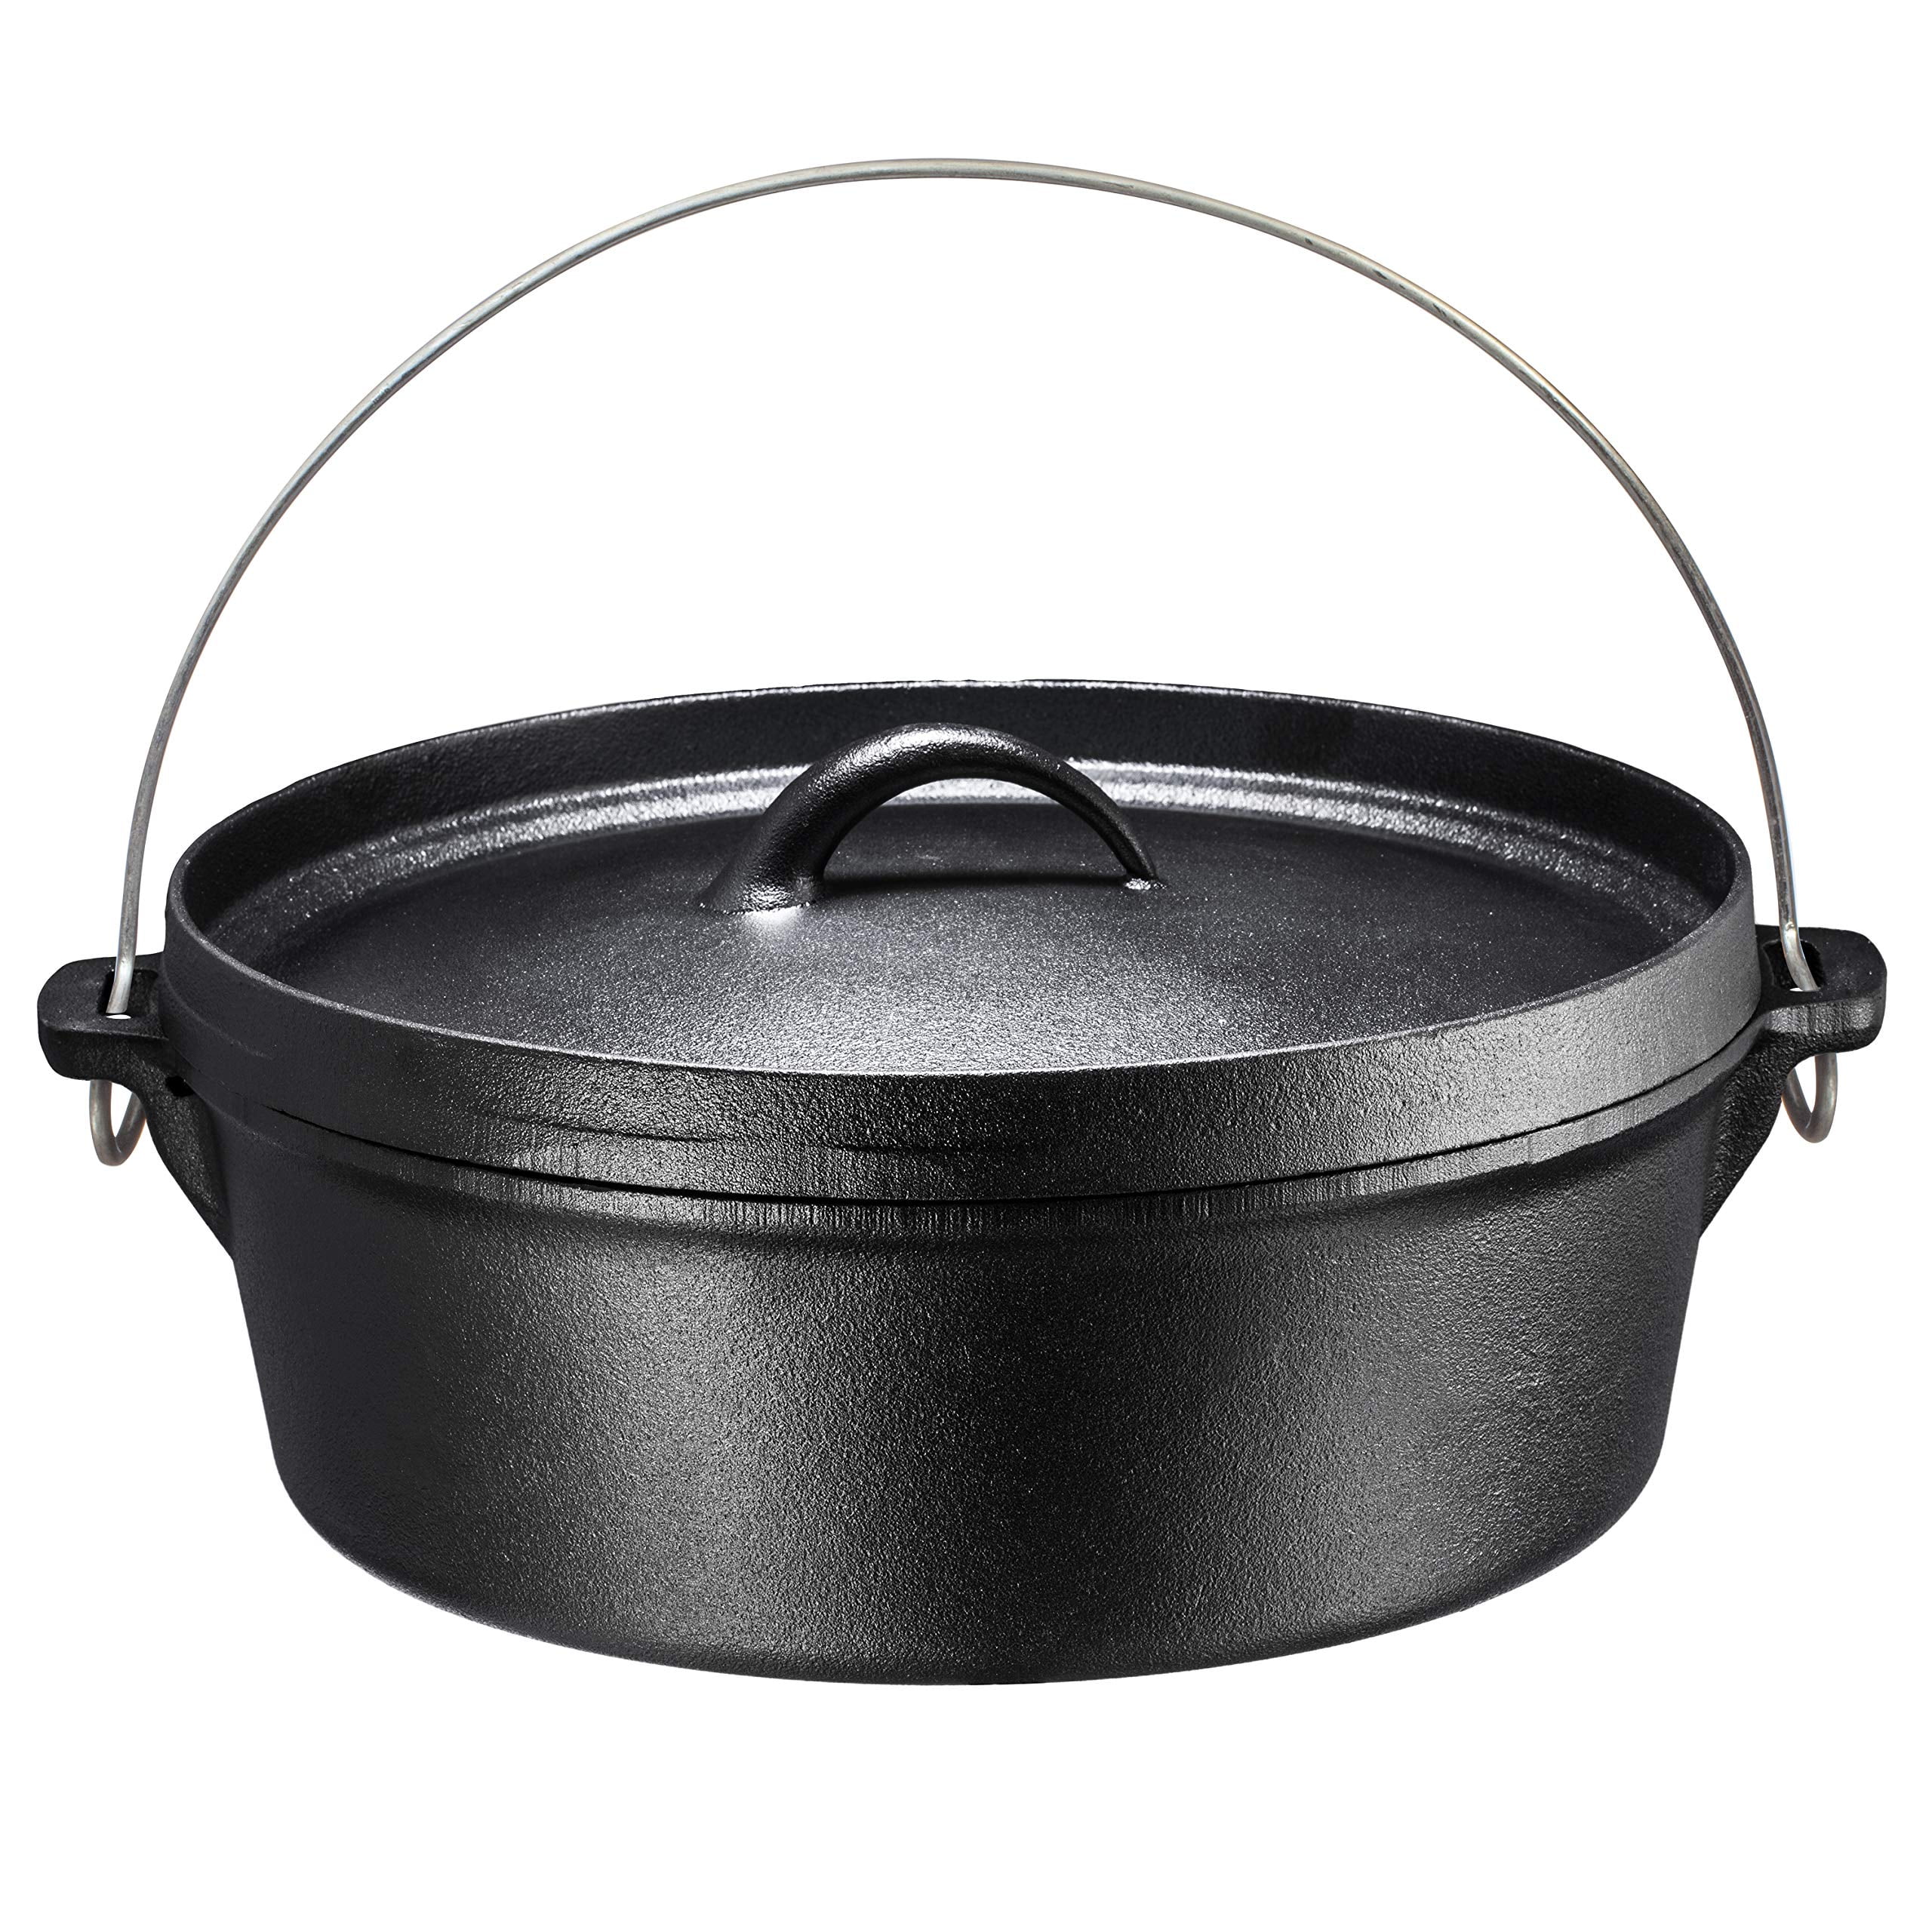 Bruntmor Cast Iron Dutch Oven with Flanged Lid Iron Cover, 6Qtz 